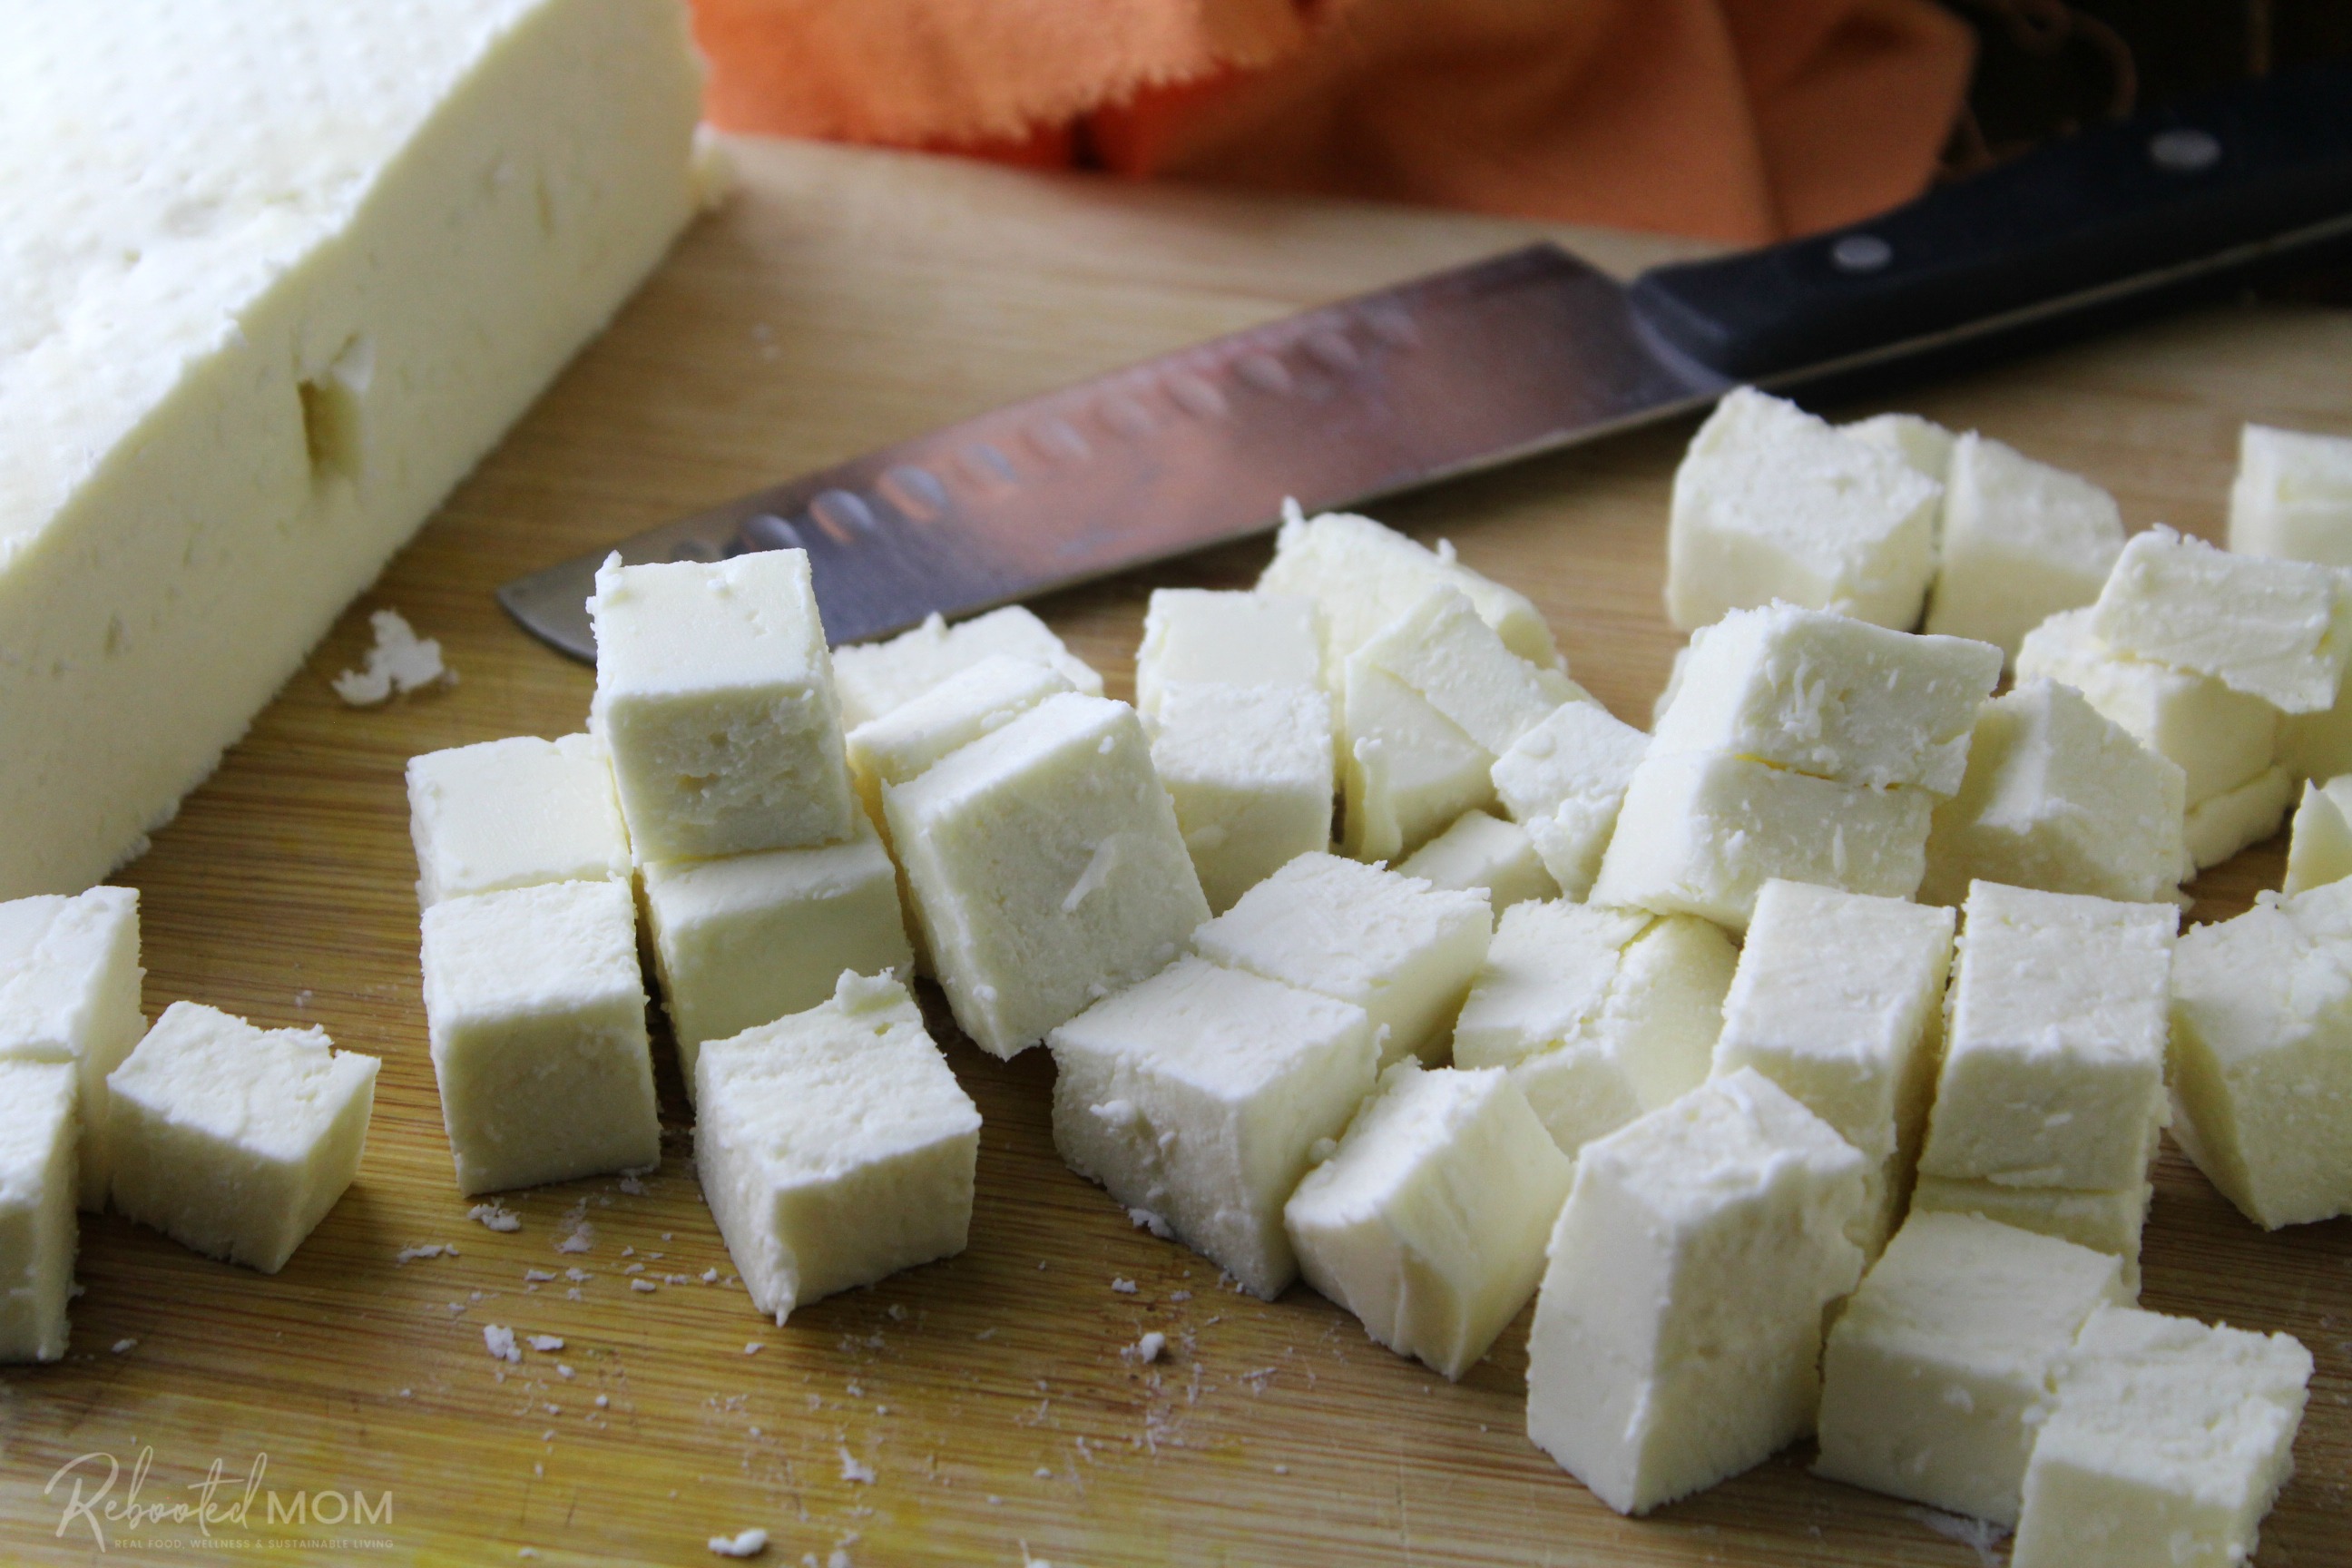 Learn how to make paneer cheese at home with these simple step by step directions that will allow you to make this deliciously soft, cubed cheese.